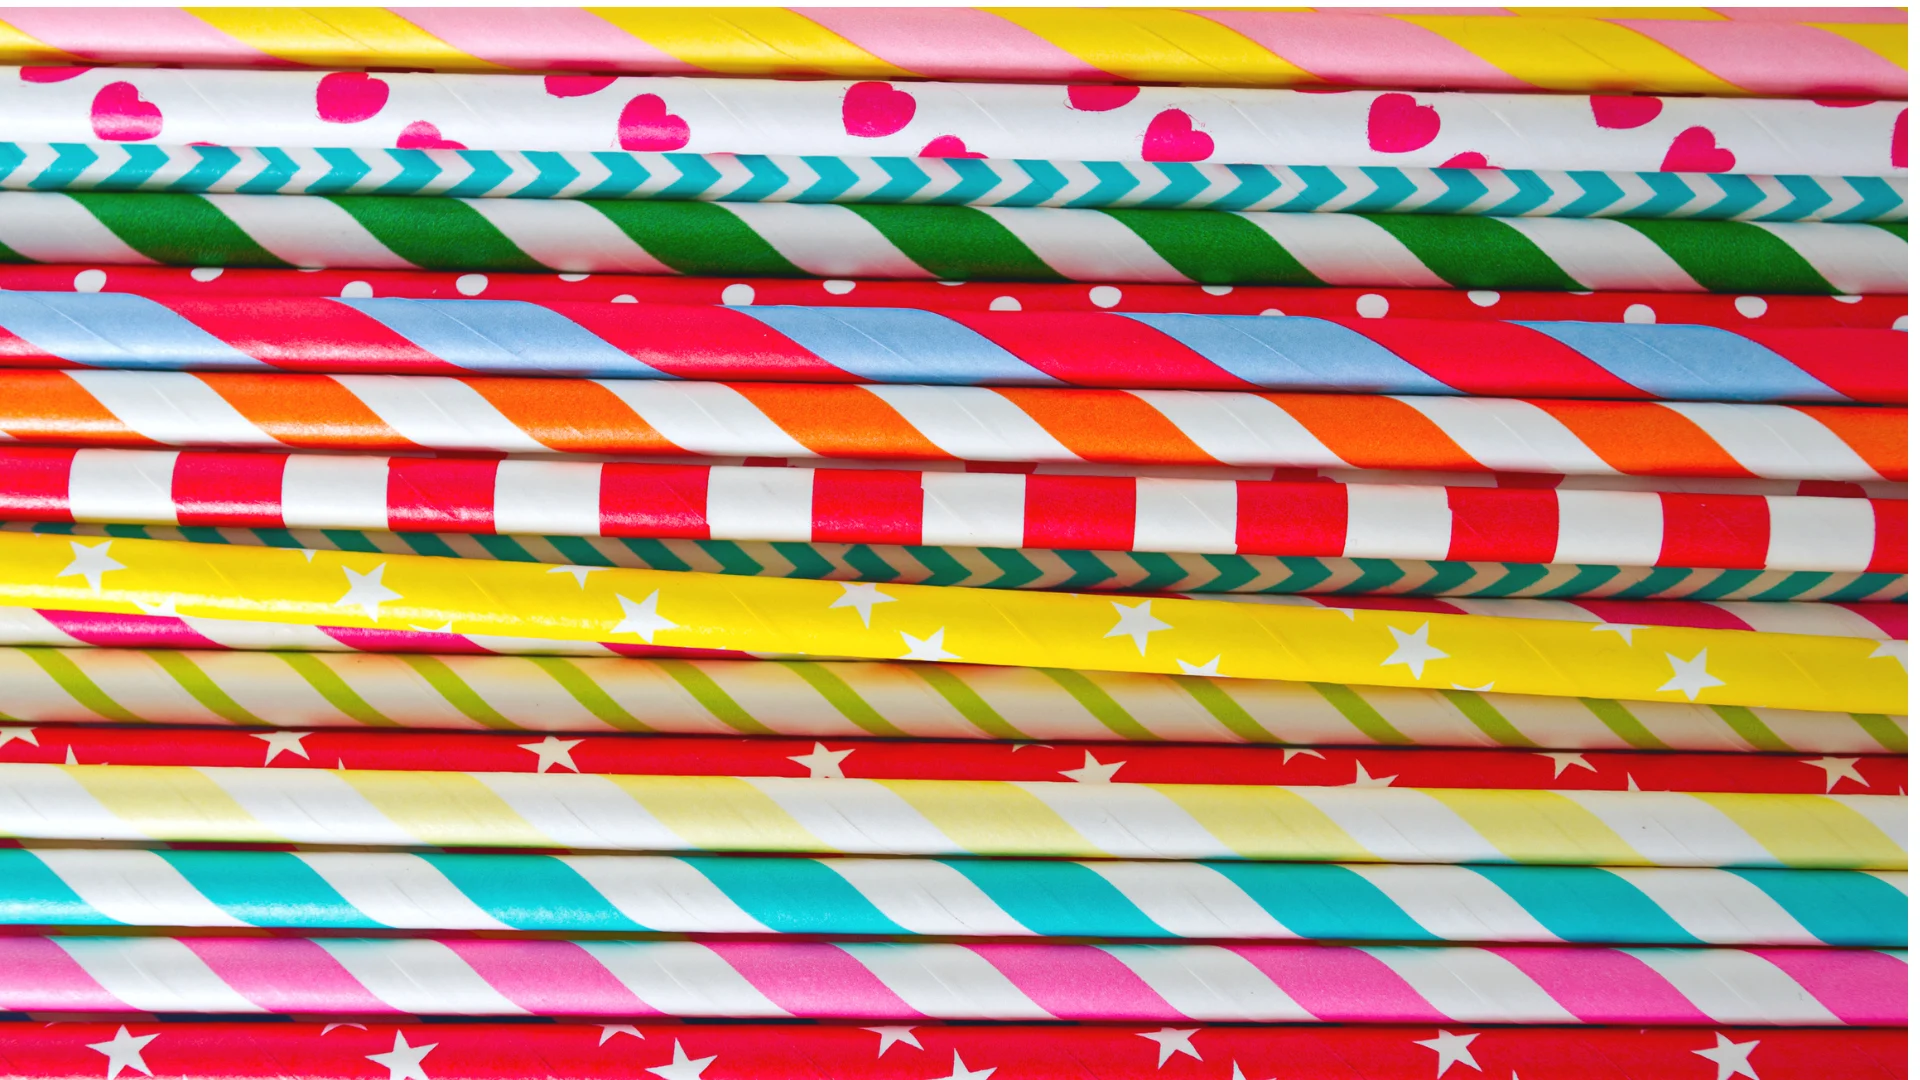 Toxic chemicals found in paper straws, which may not be eco-friendly after all